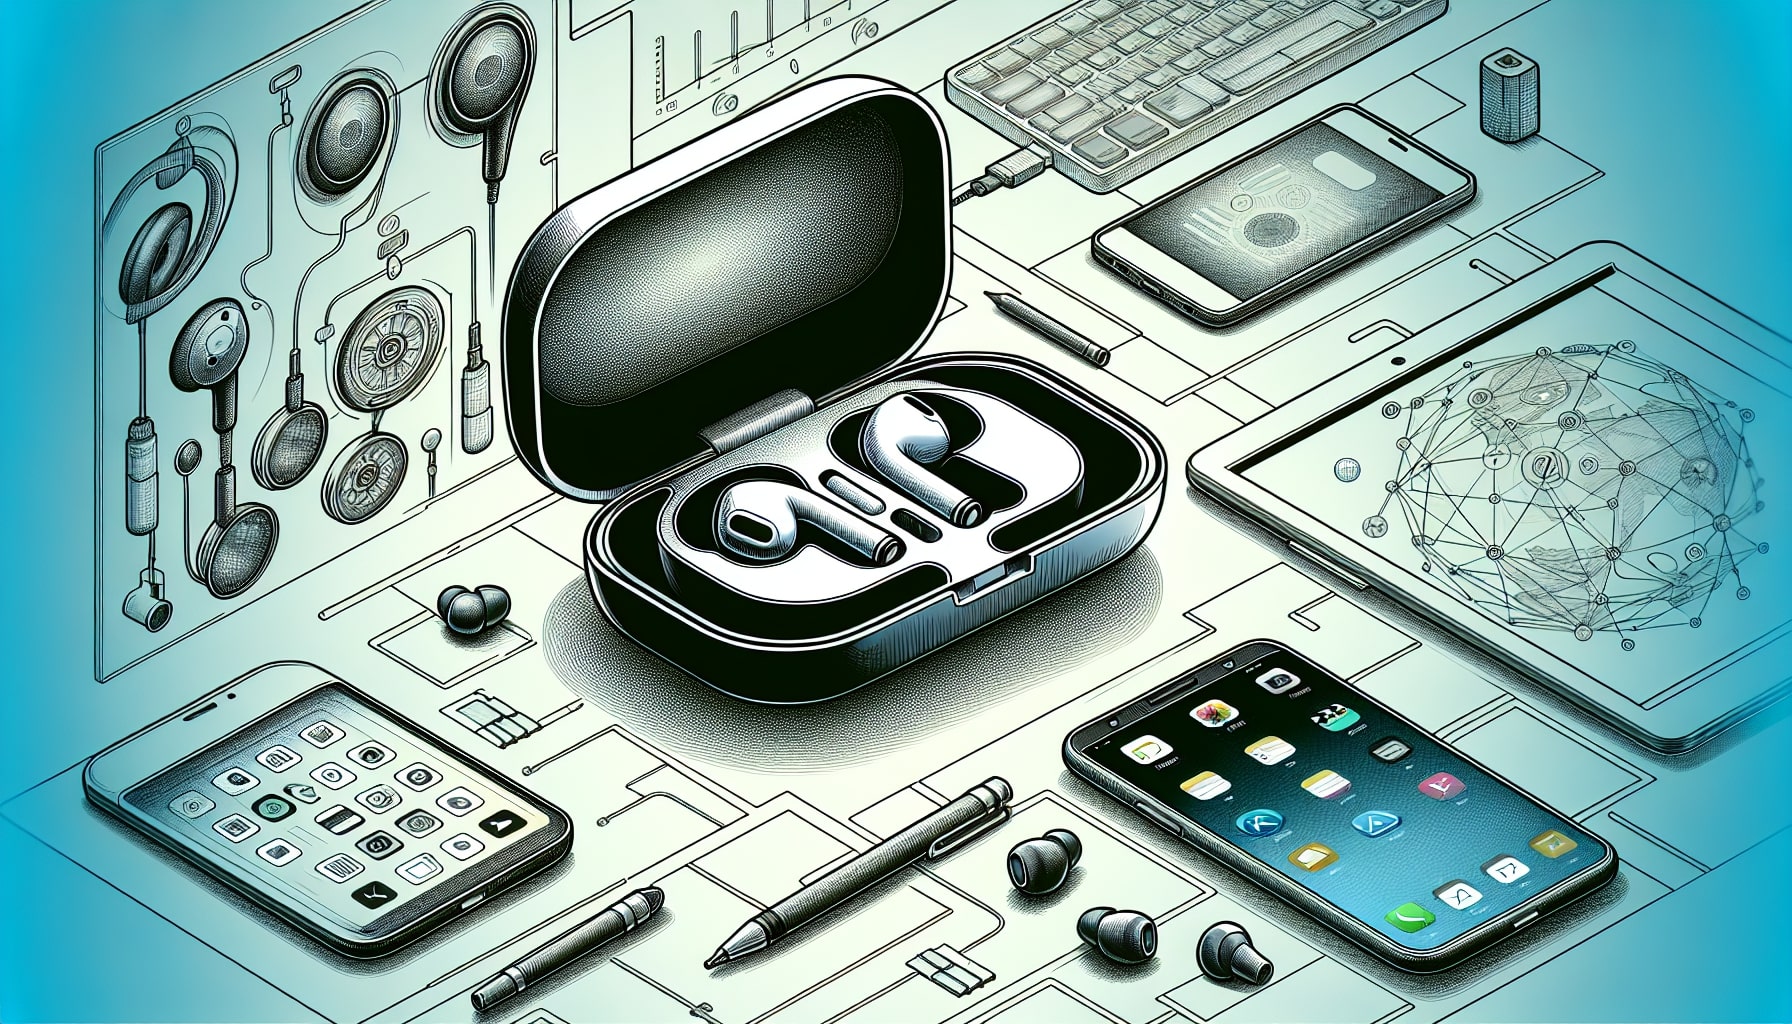 Illustrated tech gadgets and wireless earbuds with charging case.